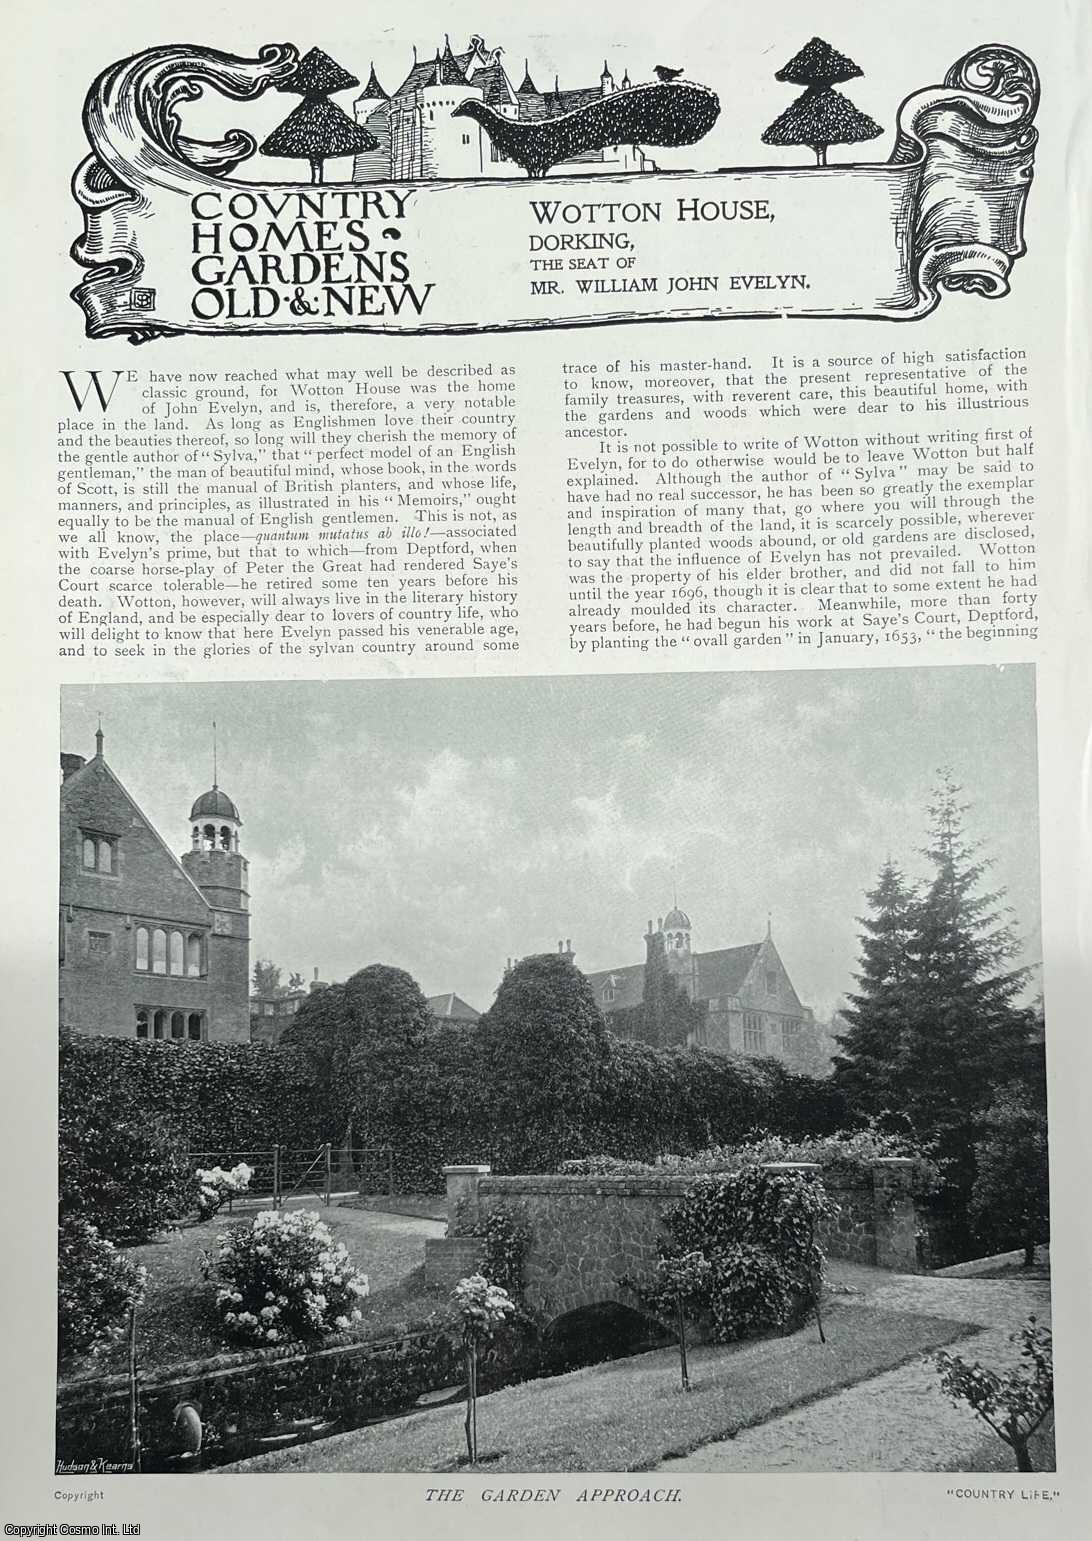 COUNTRY LIFE - Wotton House, Dorking. Several pictures and accompanying text, removed from an original issue of Country Life Magazine, 1898.